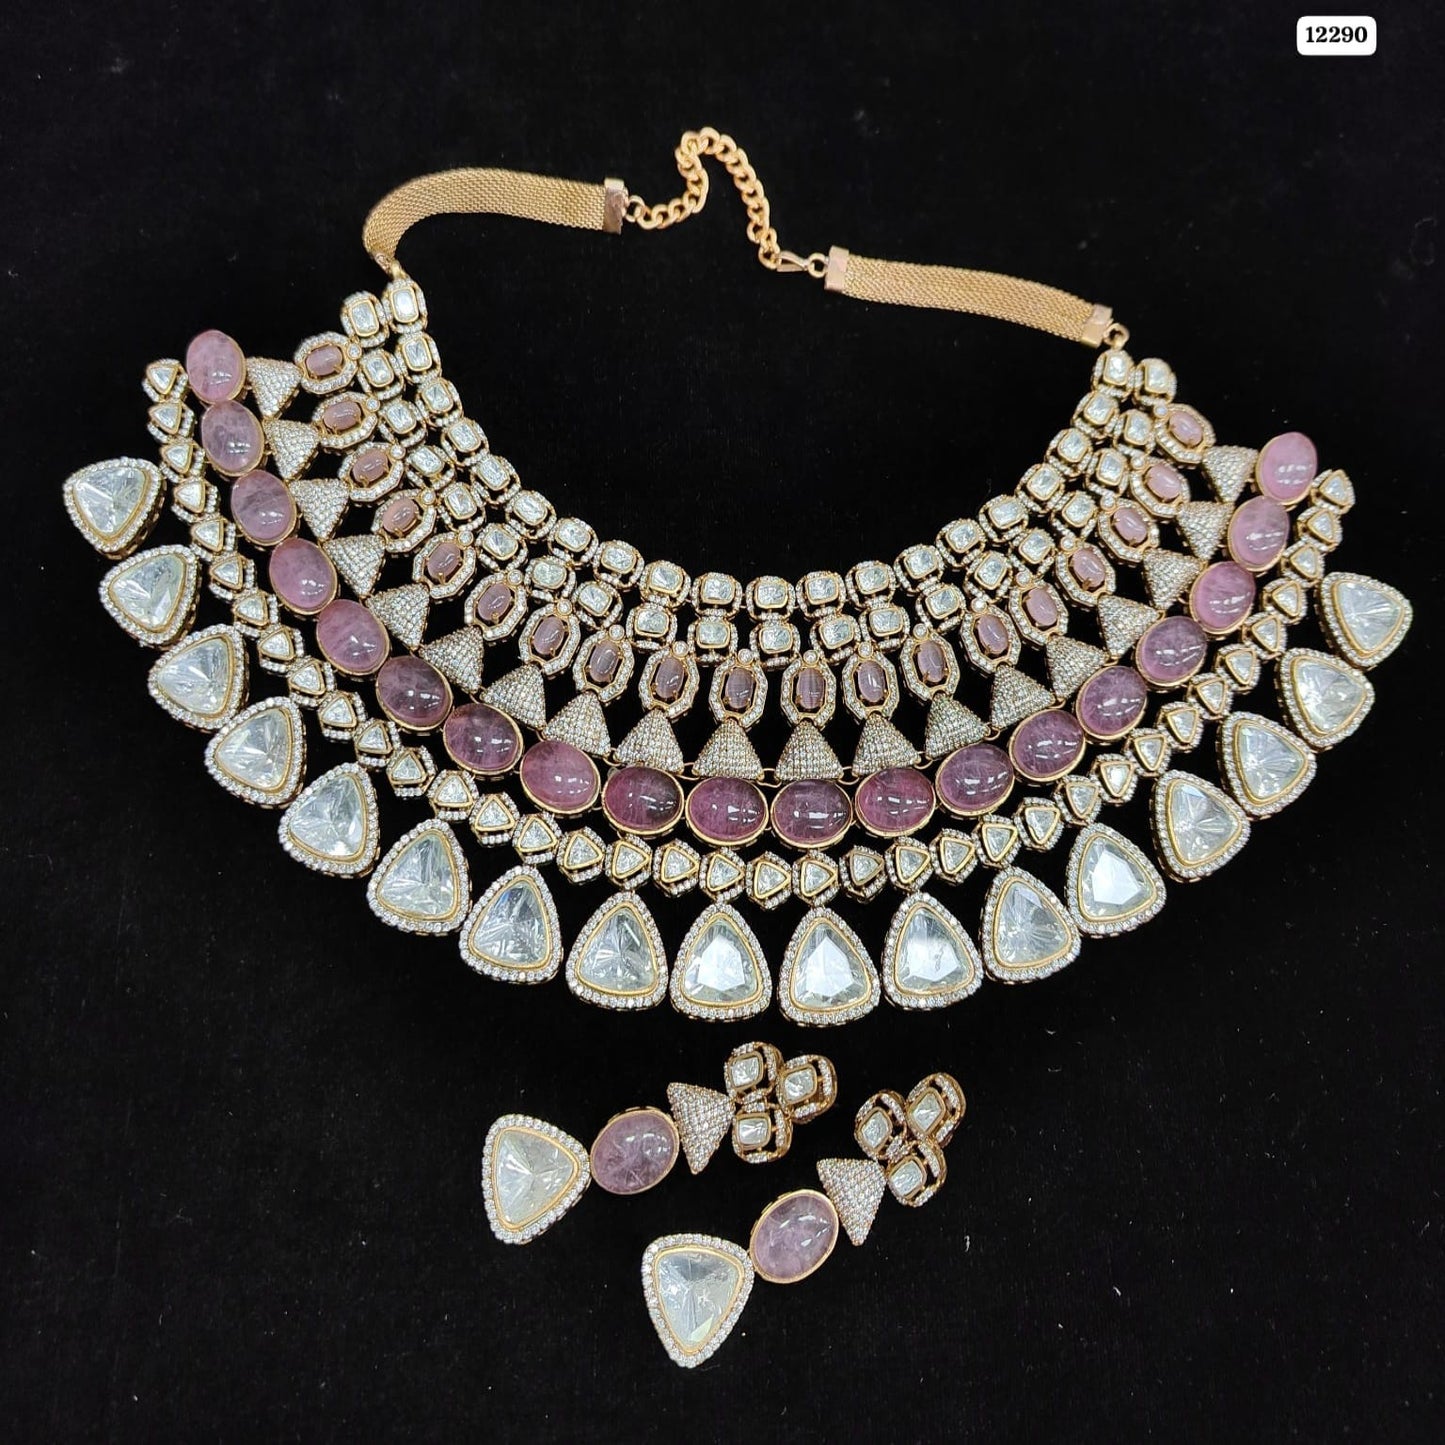 Sovereign Elegance: High Quality Polki Kundan Necklace Set with Matching Earrings